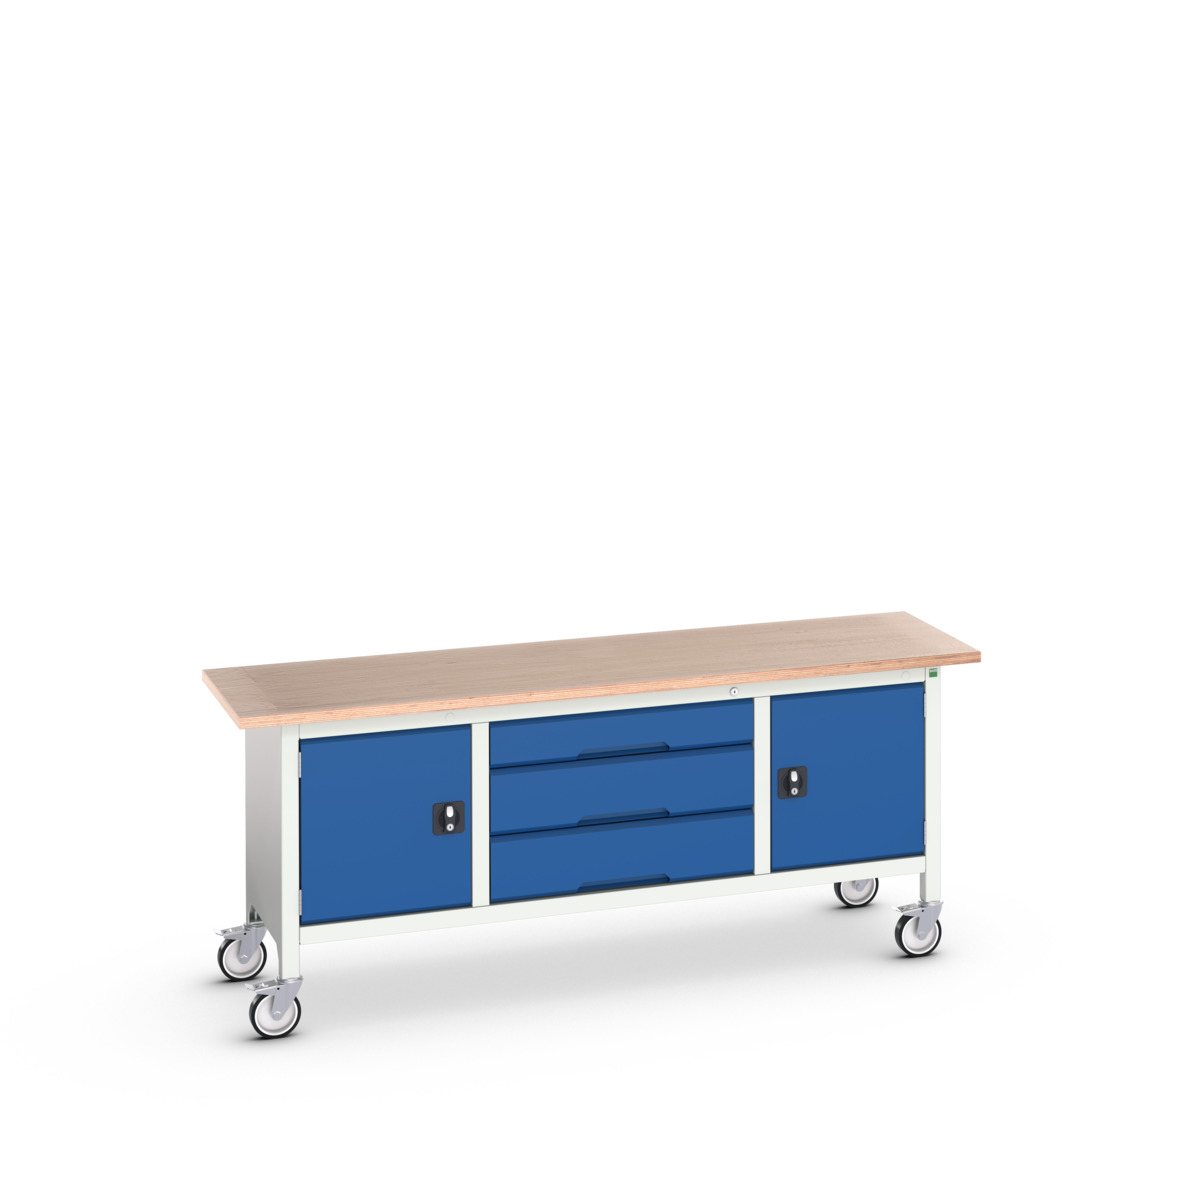 16923232.11 - verso mobile storage bench (mpx)